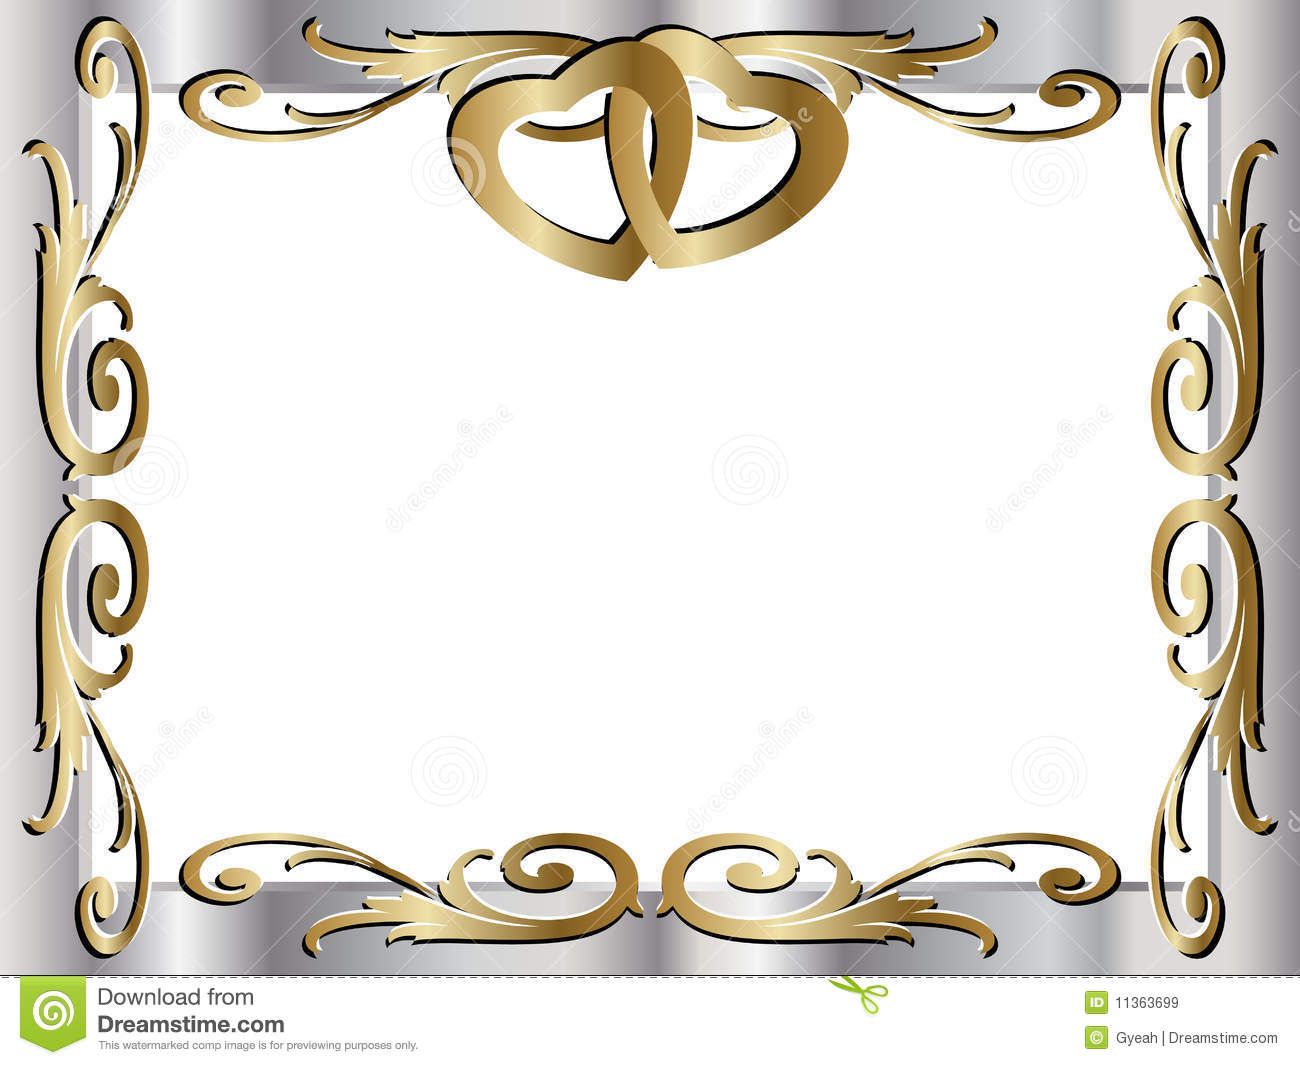 Free Download Wedding Frames And Borders Wedding Anniversary.